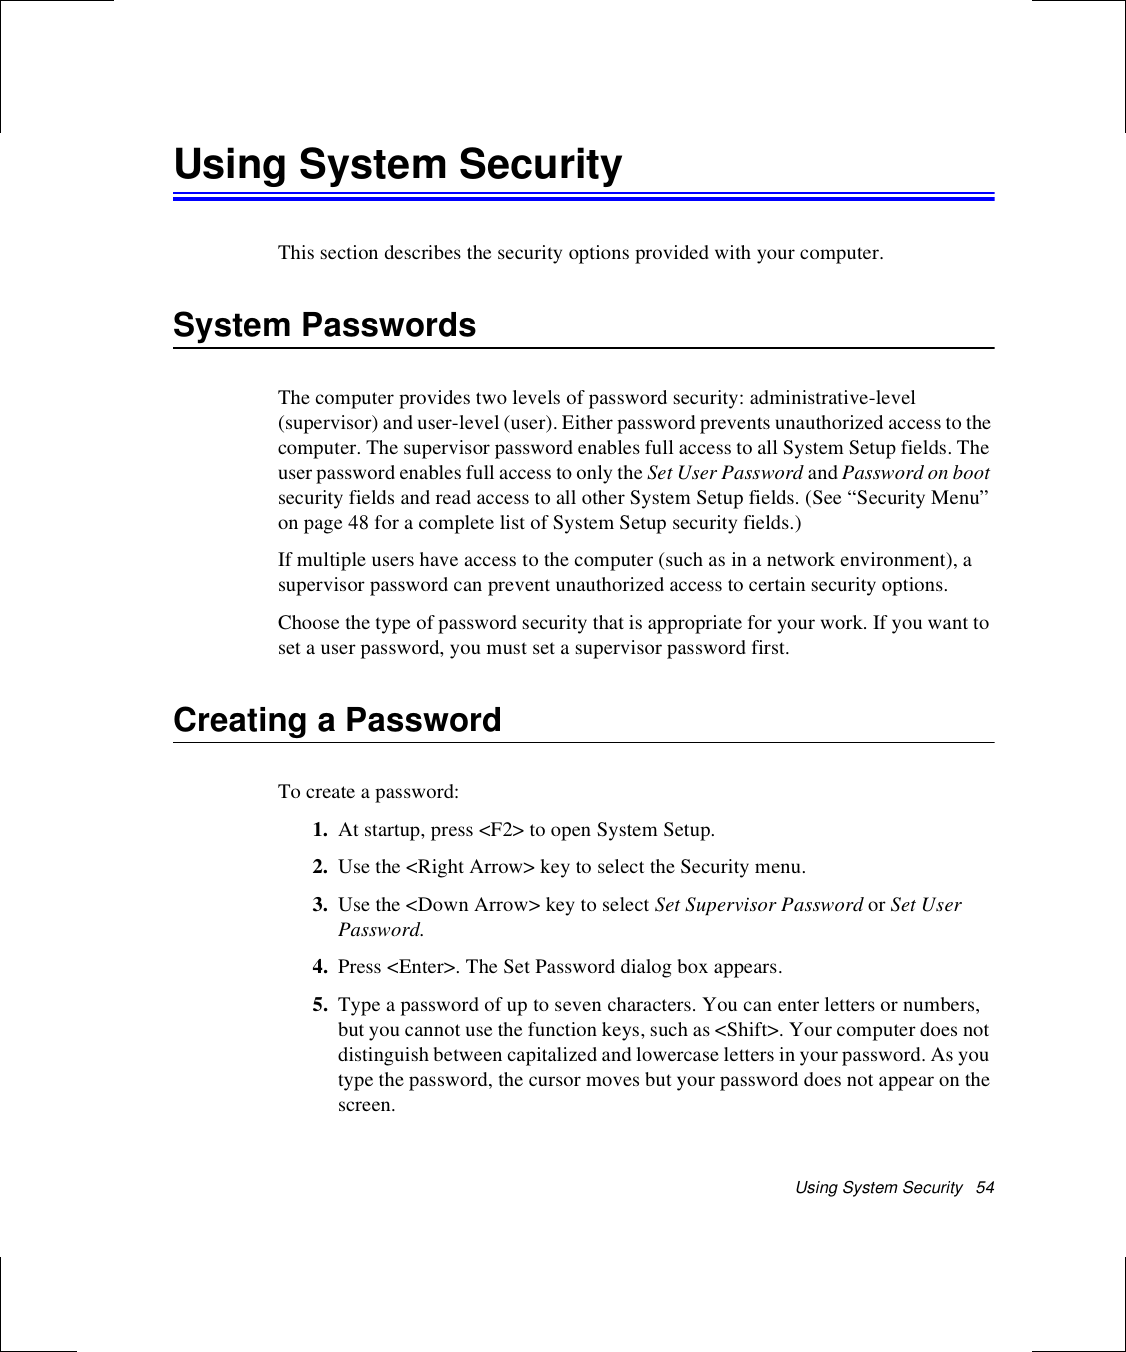 Using System Security   54Using System SecurityThis section describes the security options provided with your computer.System PasswordsThe computer provides two levels of password security: administrative-level (supervisor) and user-level (user). Either password prevents unauthorized access to the computer. The supervisor password enables full access to all System Setup fields. The user password enables full access to only the Set User Password and Password on boot security fields and read access to all other System Setup fields. (See “Security Menu” on page 48 for a complete list of System Setup security fields.)If multiple users have access to the computer (such as in a network environment), a supervisor password can prevent unauthorized access to certain security options.Choose the type of password security that is appropriate for your work. If you want to set a user password, you must set a supervisor password first.Creating a PasswordTo create a password:1. At startup, press &lt;F2&gt; to open System Setup.2. Use the &lt;Right Arrow&gt; key to select the Security menu.3. Use the &lt;Down Arrow&gt; key to select Set Supervisor Password or Set User Password.4. Press &lt;Enter&gt;. The Set Password dialog box appears.5. Type a password of up to seven characters. You can enter letters or numbers, but you cannot use the function keys, such as &lt;Shift&gt;. Your computer does not distinguish between capitalized and lowercase letters in your password. As you type the password, the cursor moves but your password does not appear on the screen. 